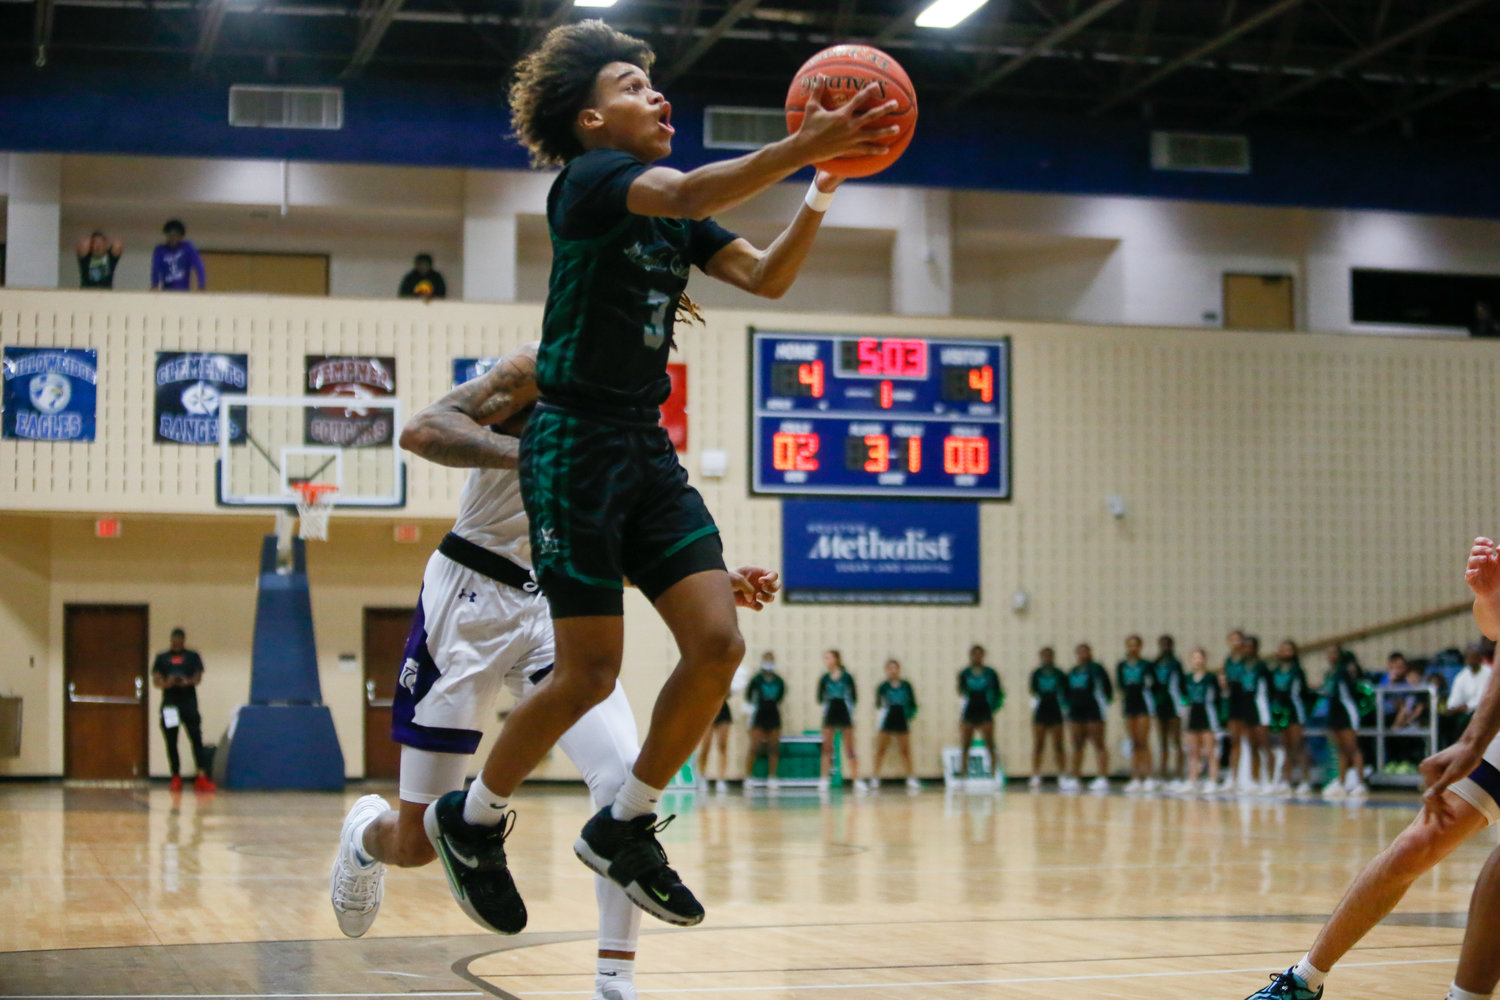 Christian Jones shoots a layup during Tuesday's game against Ridge Point.